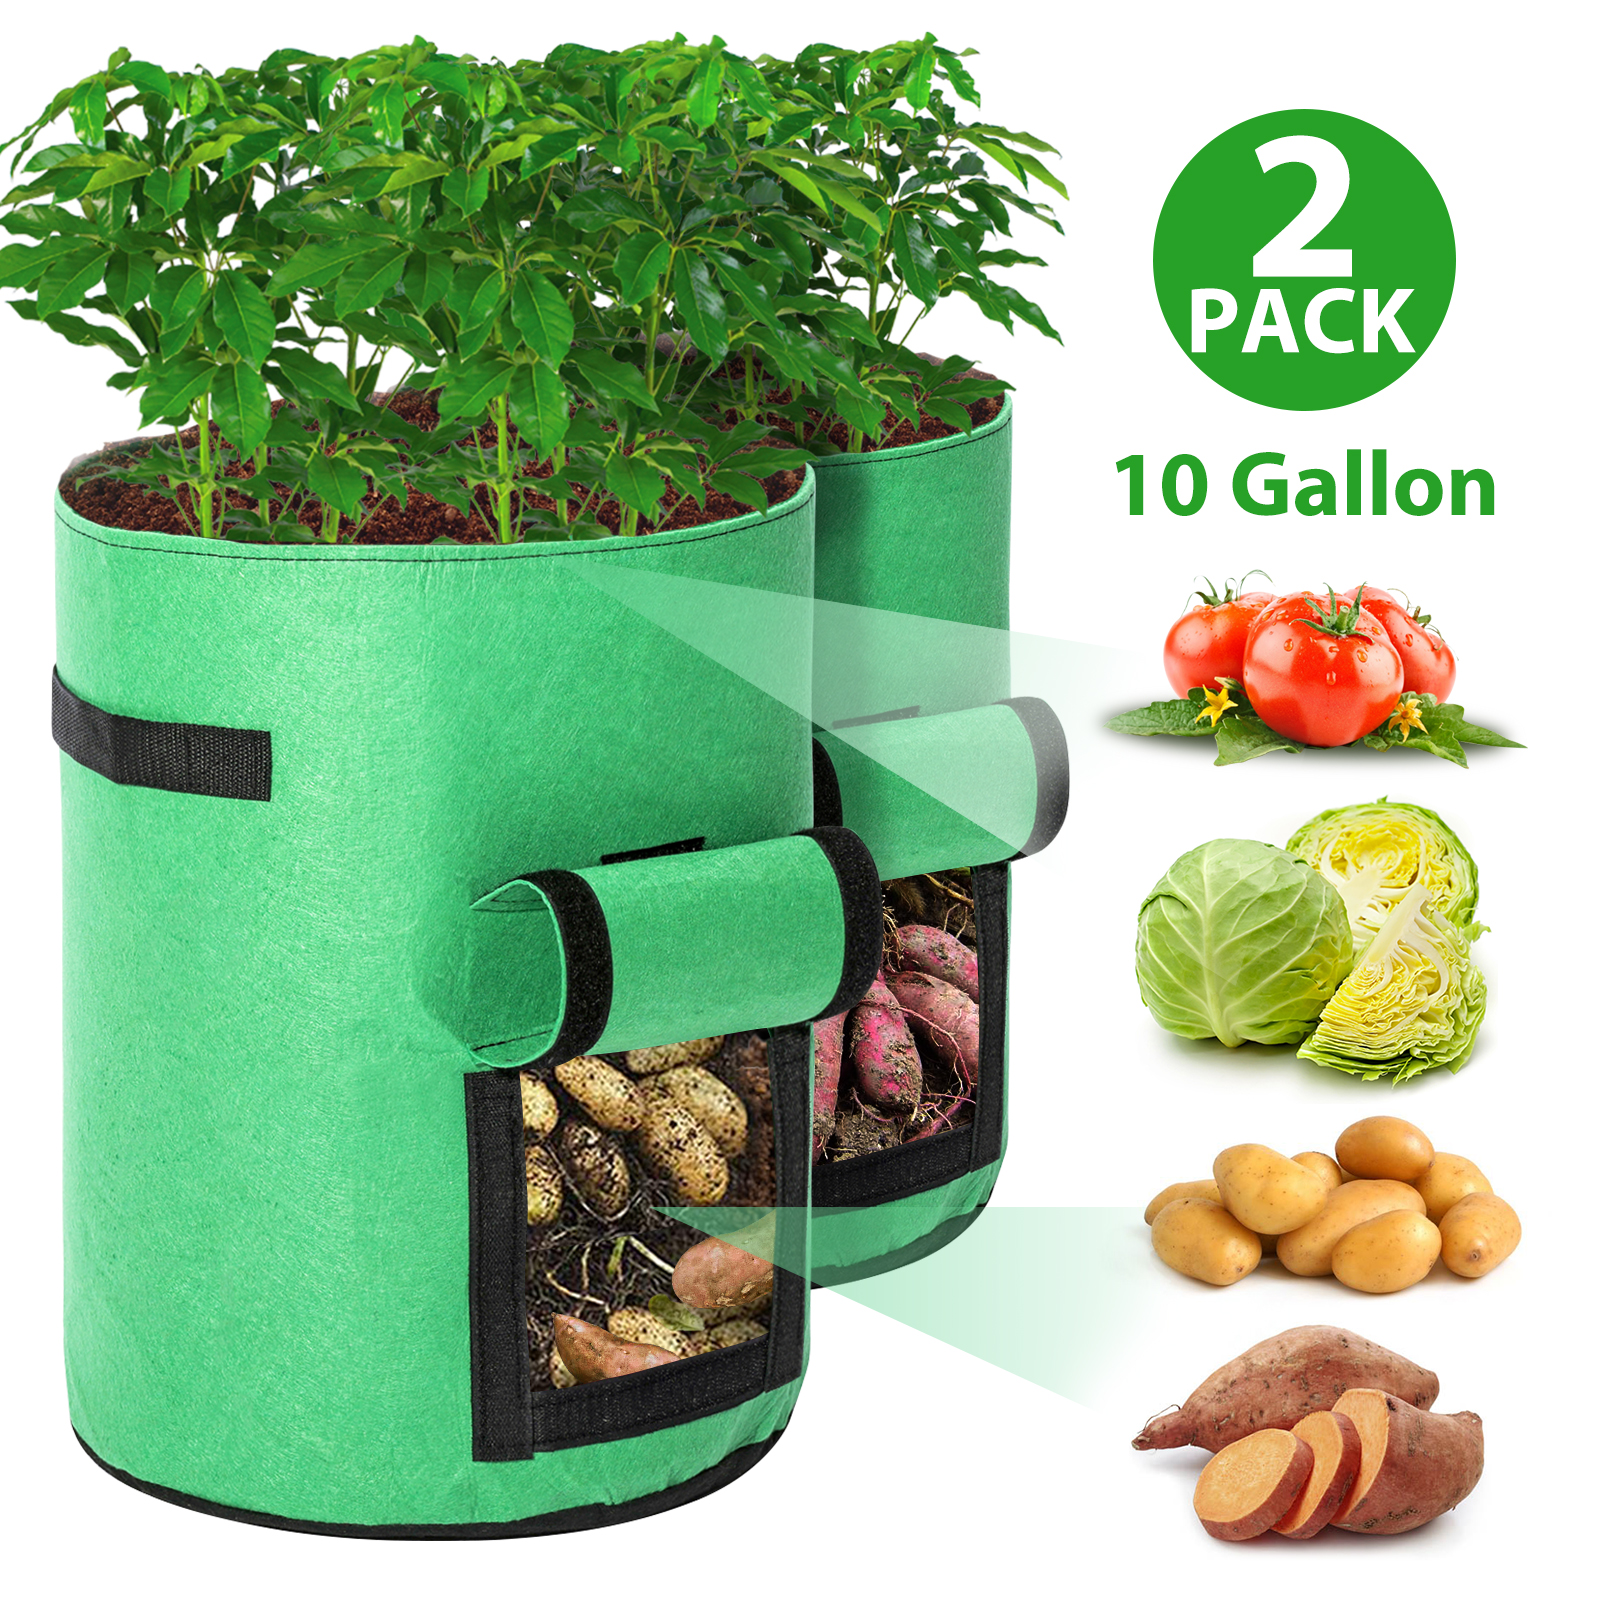 2-Pack-10-Gallon-Planting-Pouch-Fabric-Pots-Premium-Breathable-Cloth-Bags-for-Potato-Plant-Container-1796789-1